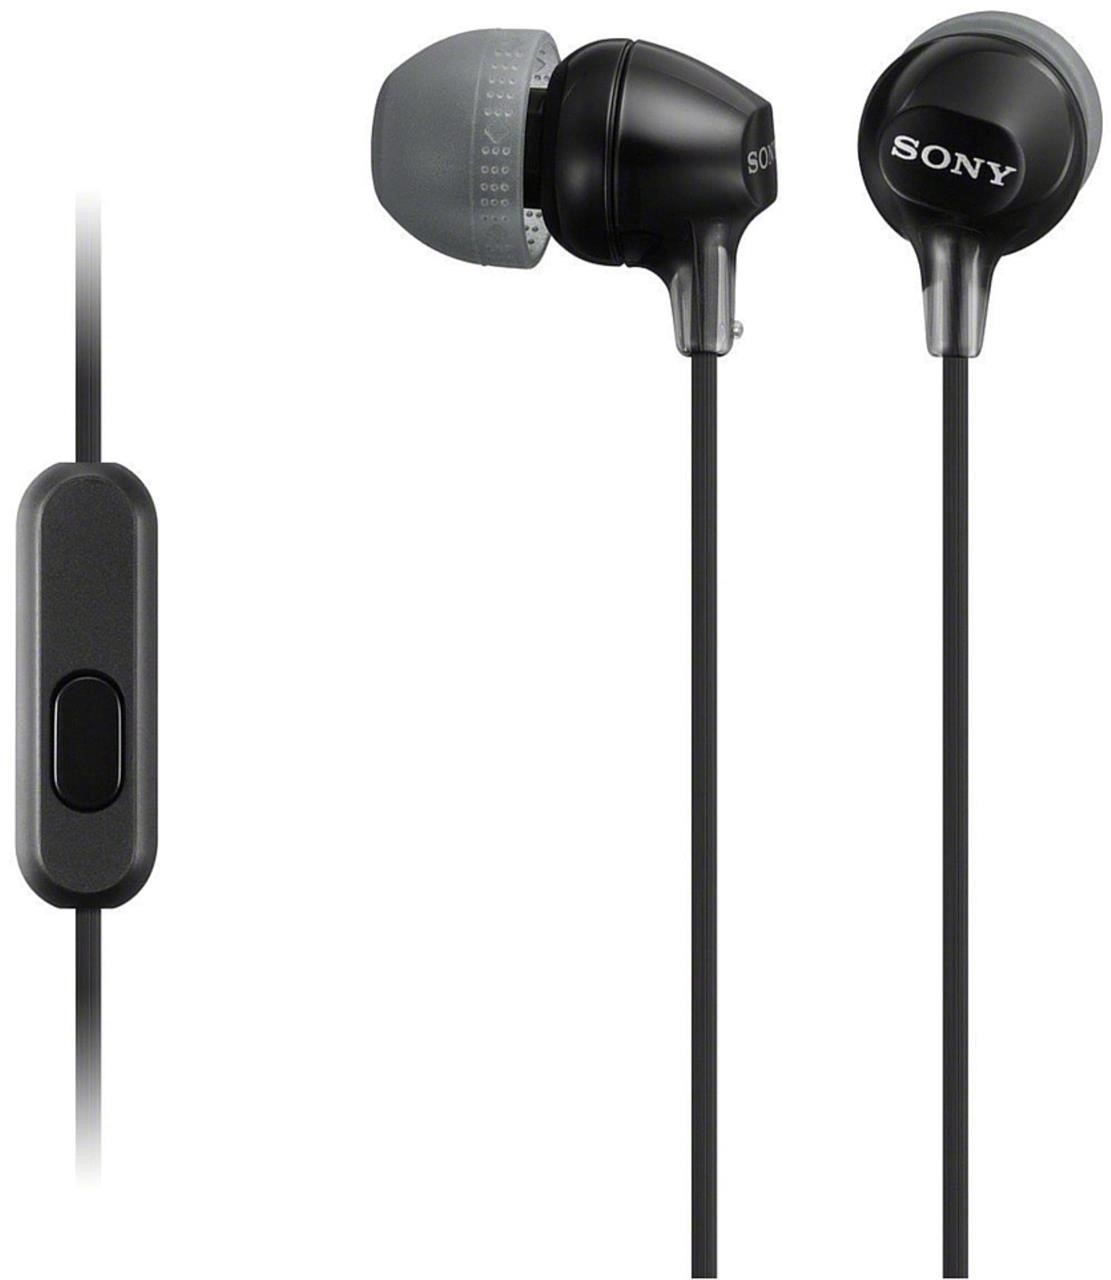 SONY Fashion Color EX Earbud Headset in Black